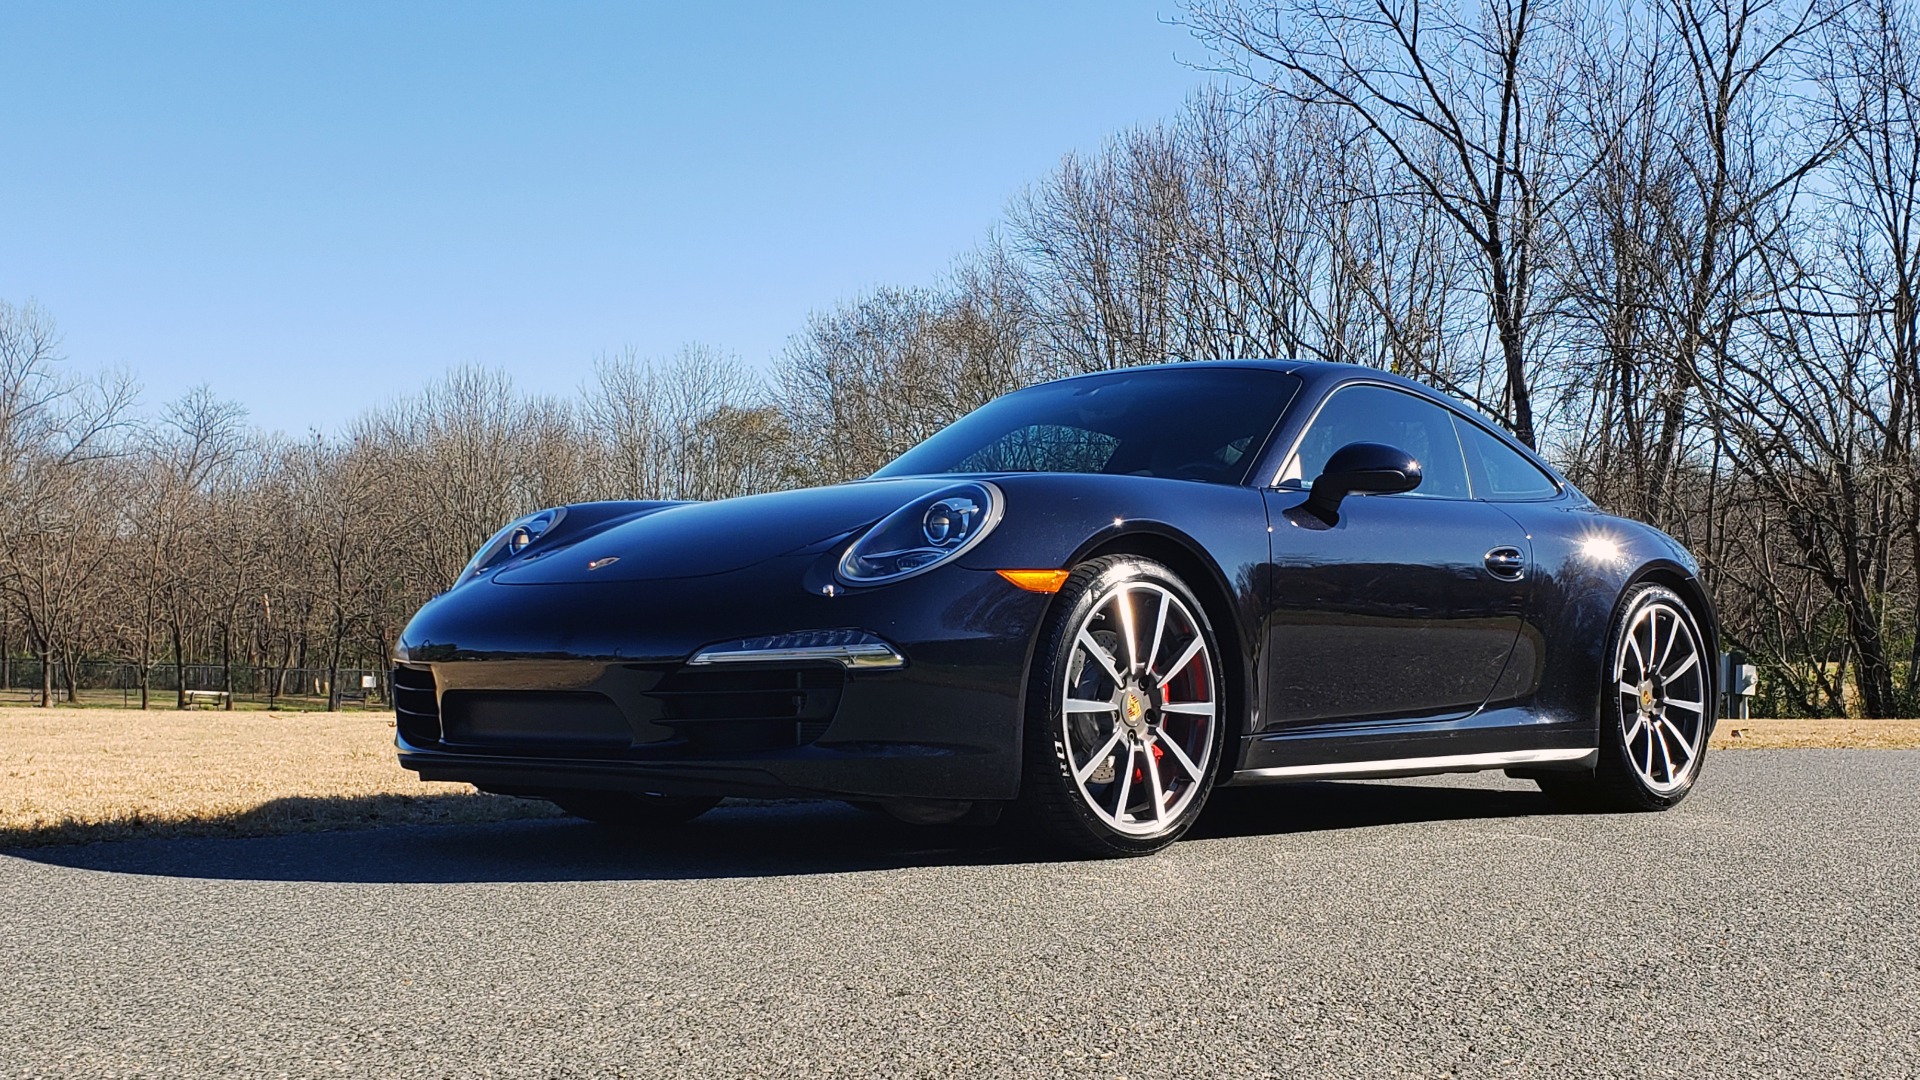 Used 2016 Porsche 911 CARRERA 4S PREM / NAV / CHRONO / BOSE / PDLS / SPORT EXH for sale Sold at Formula Imports in Charlotte NC 28227 3